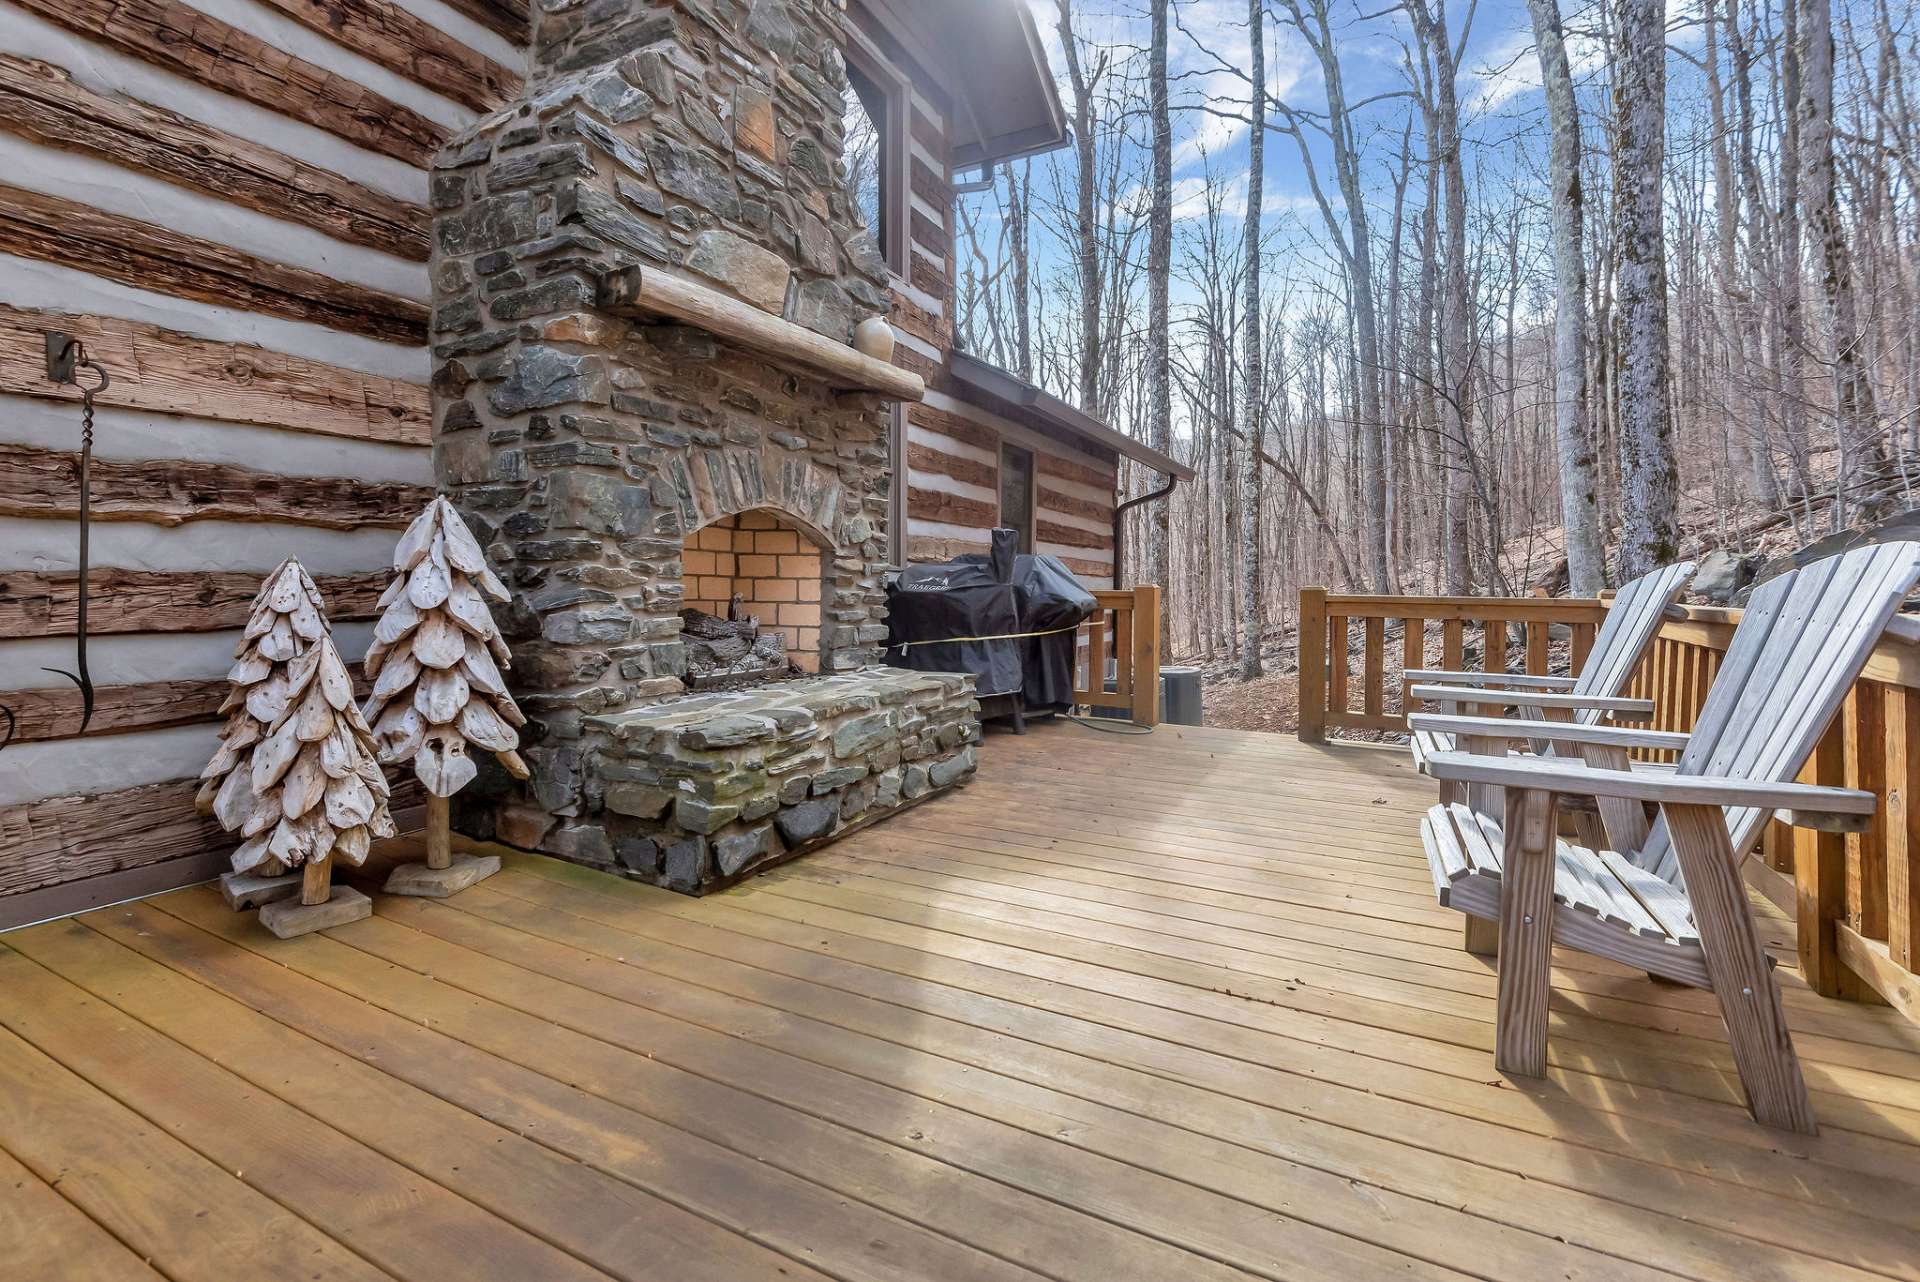 Enjoy the side deck, adorned with an outdoor stone fireplace, inviting your guests to linger late into the evening.